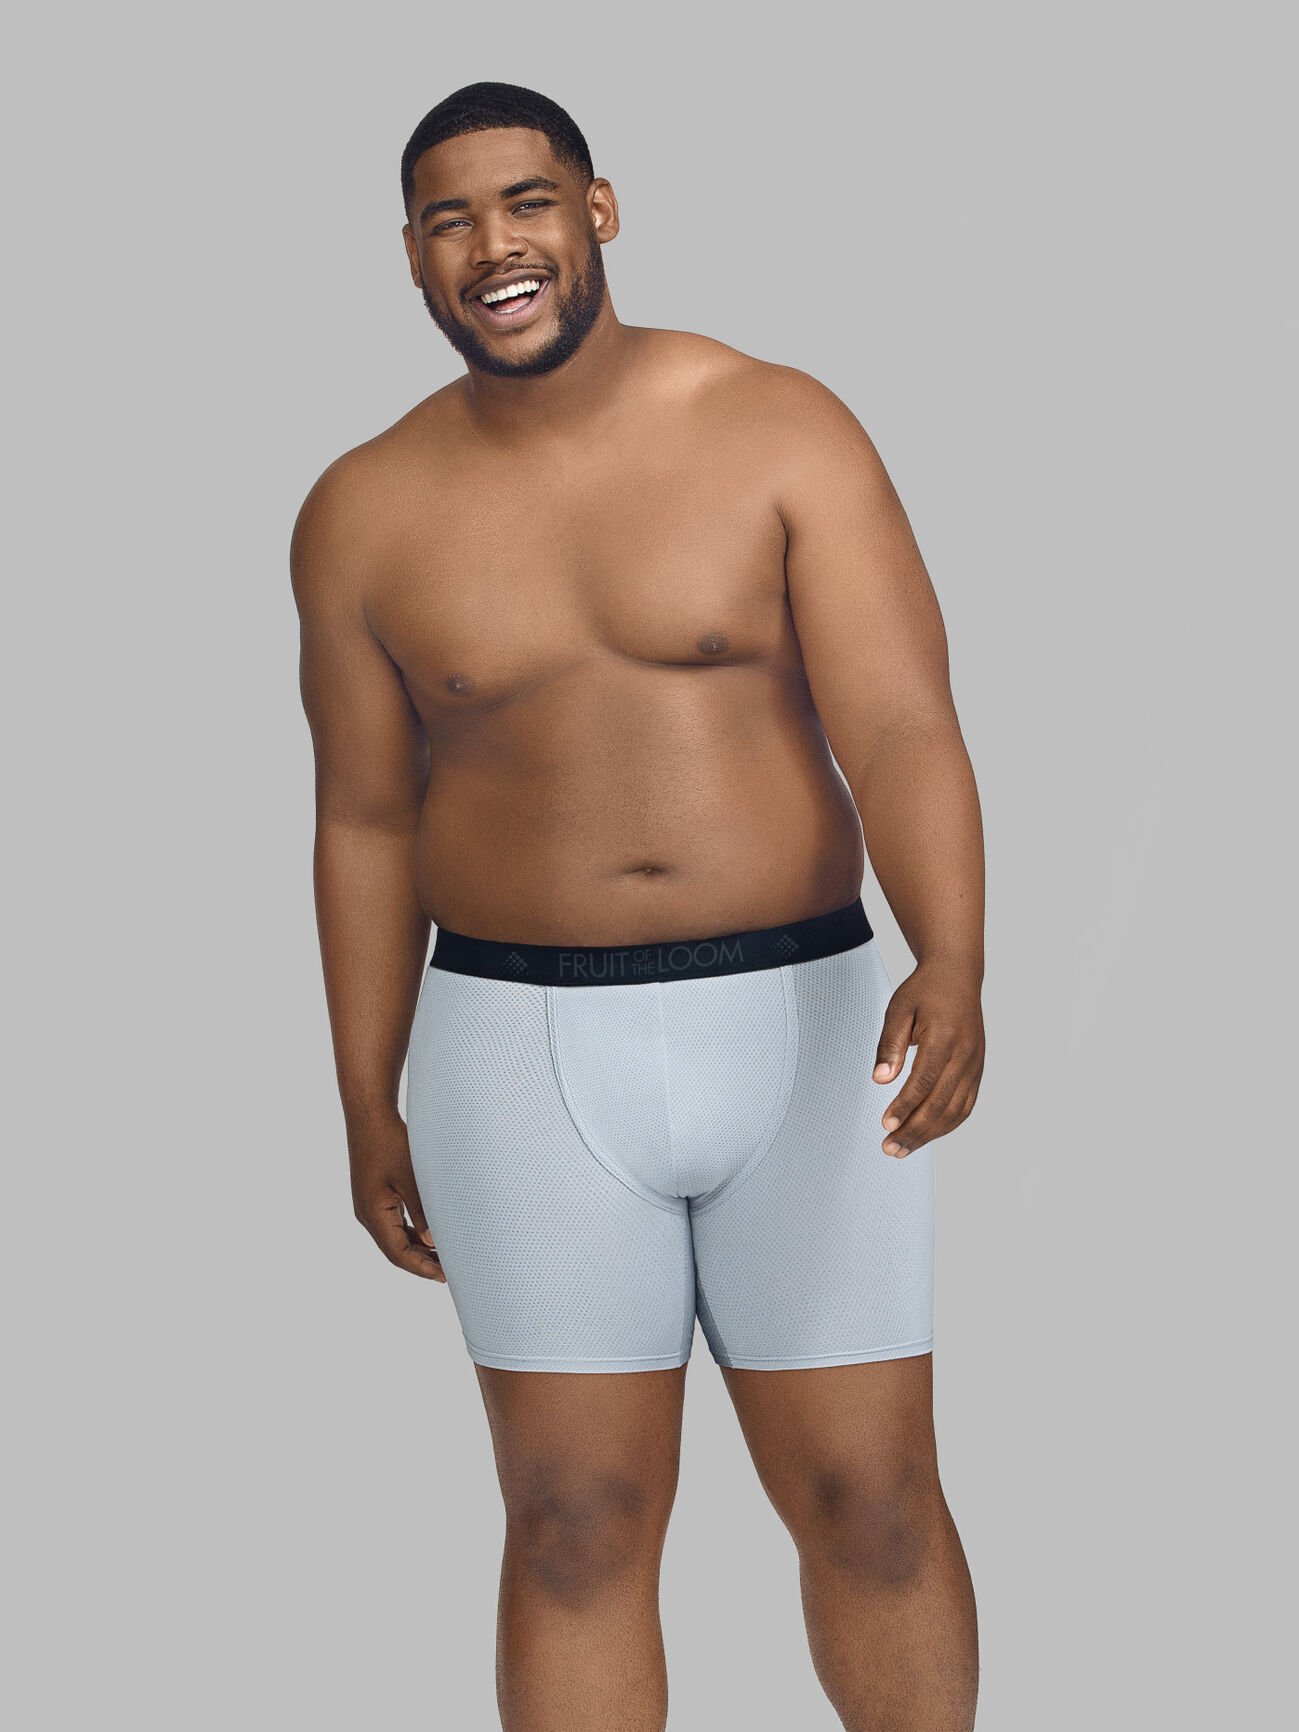 Fruit Of The Loom Boxer Briefs 3-pack Review 